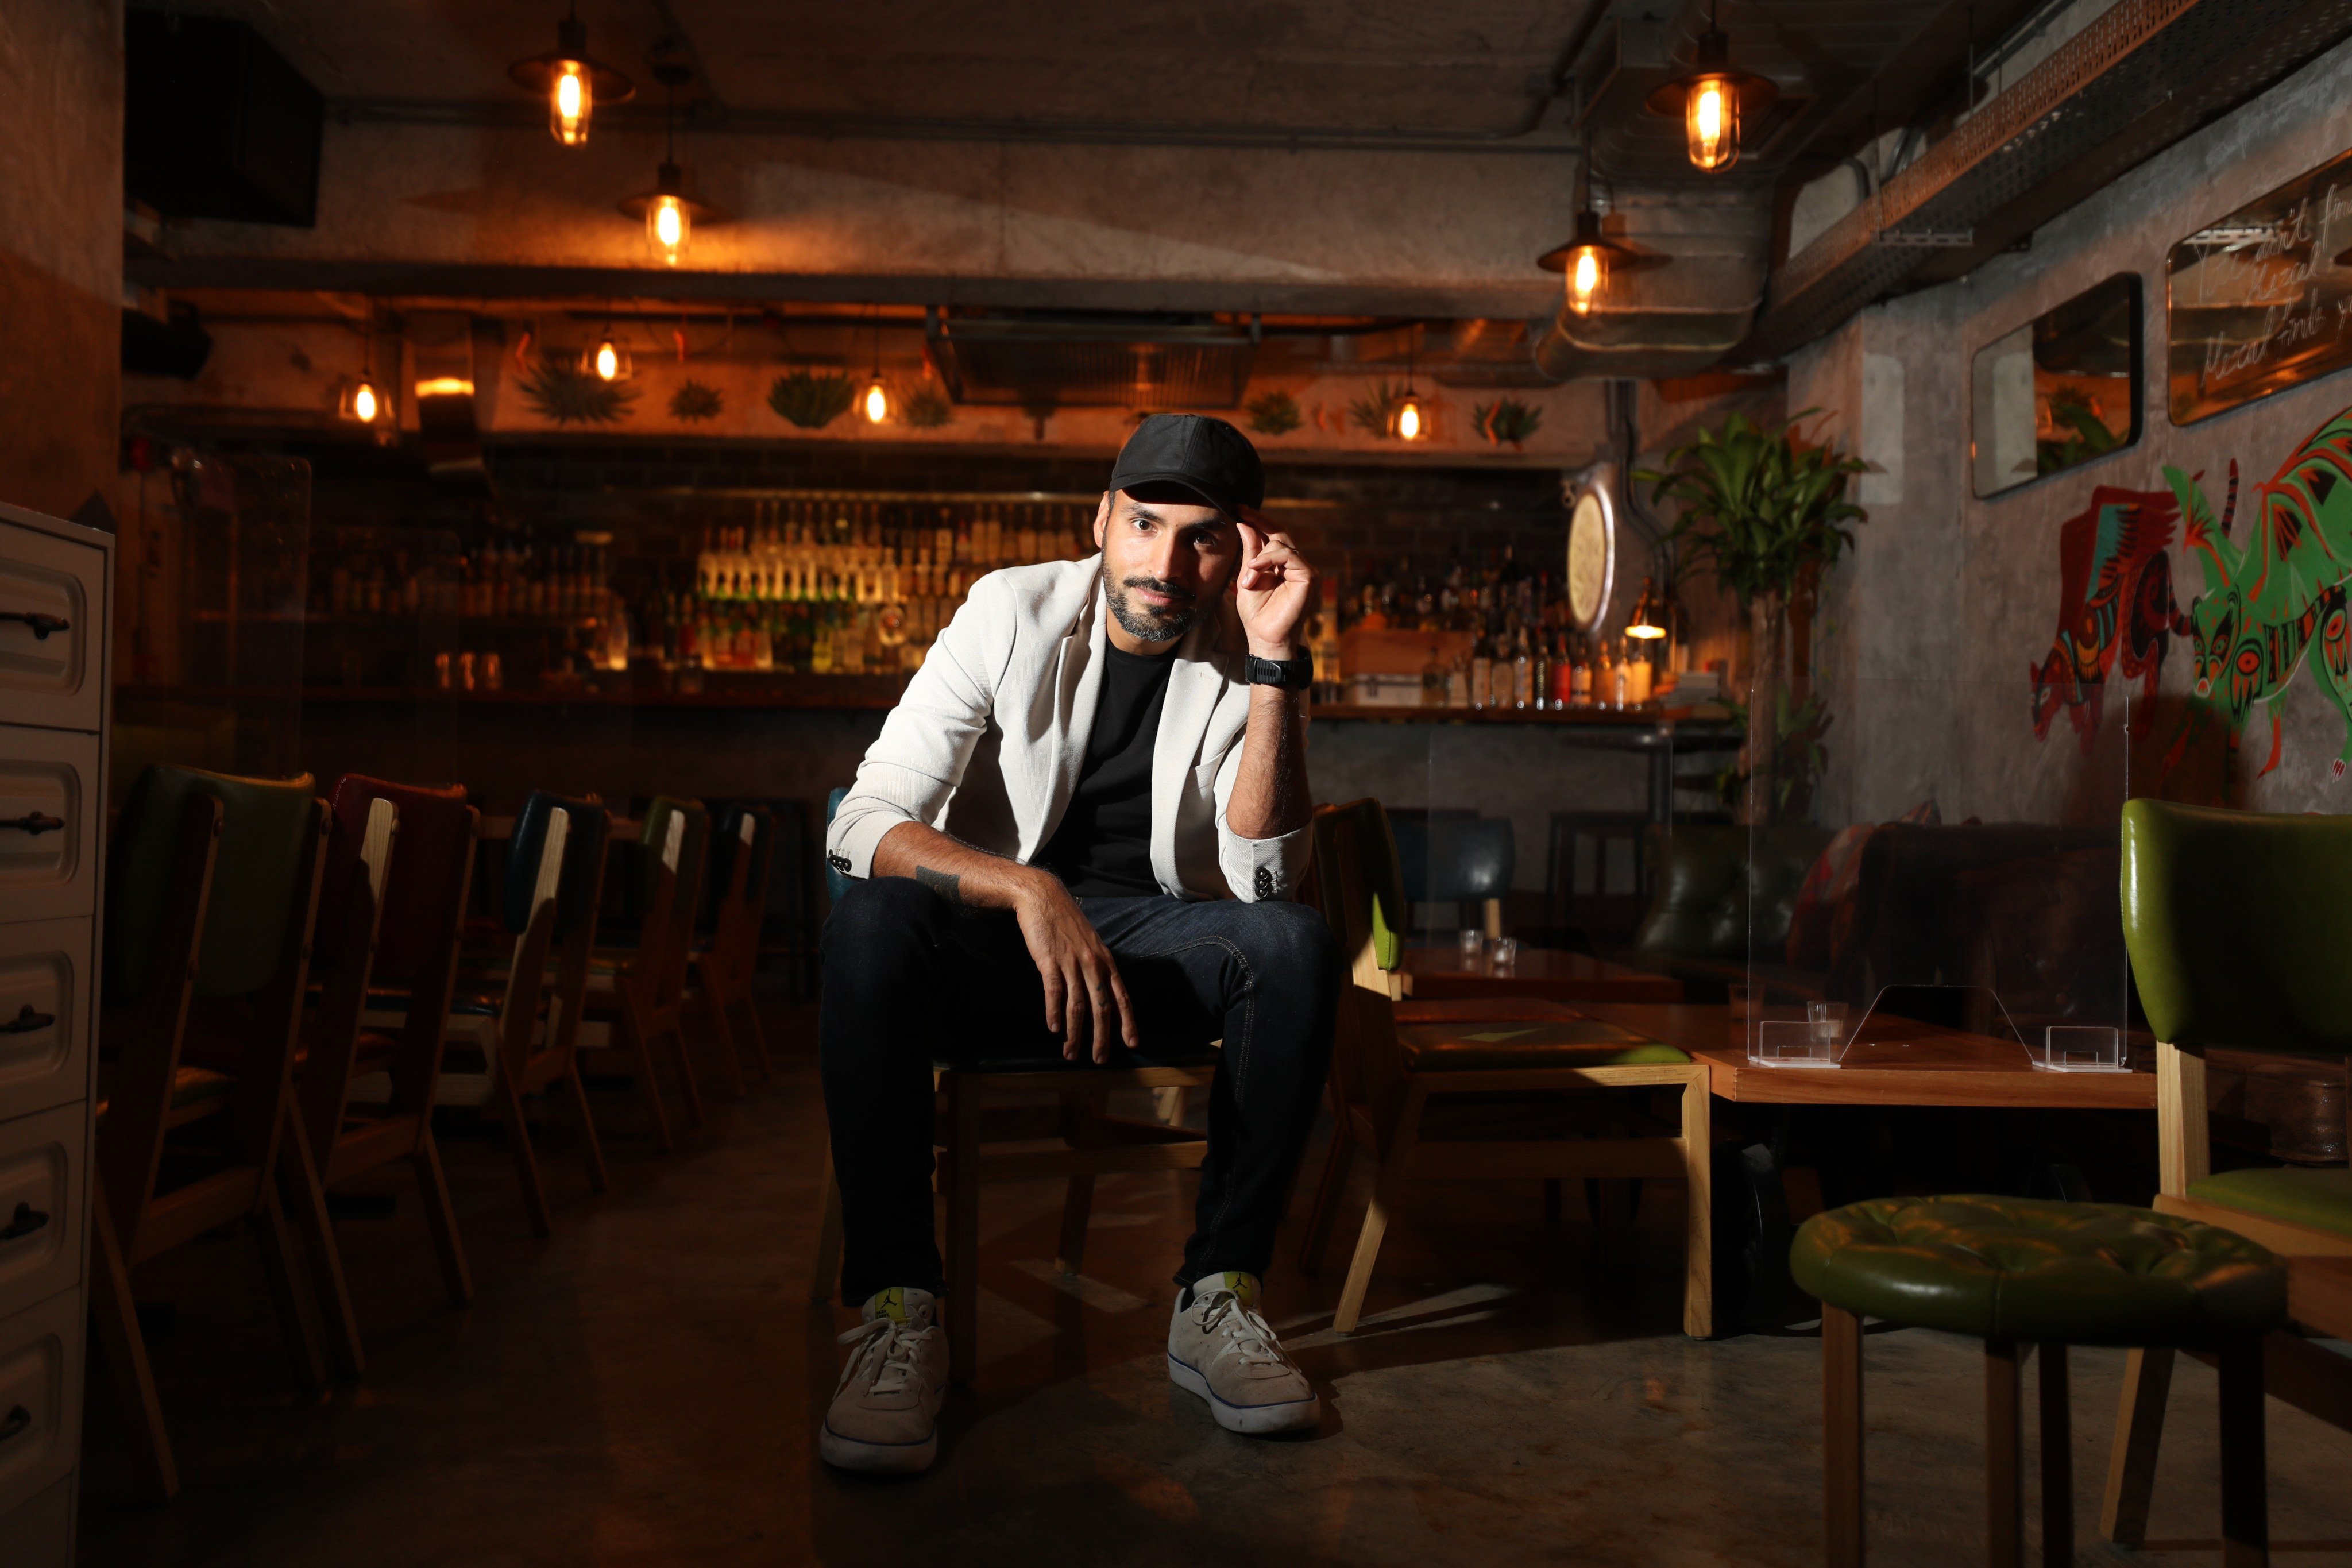 Jay Khan and his Hong Kong bar Coa have made history with Asia’s 50 Best Bars by winning the coveted No 1 spot three times. Photo: SCMP/Xiaomei Chen